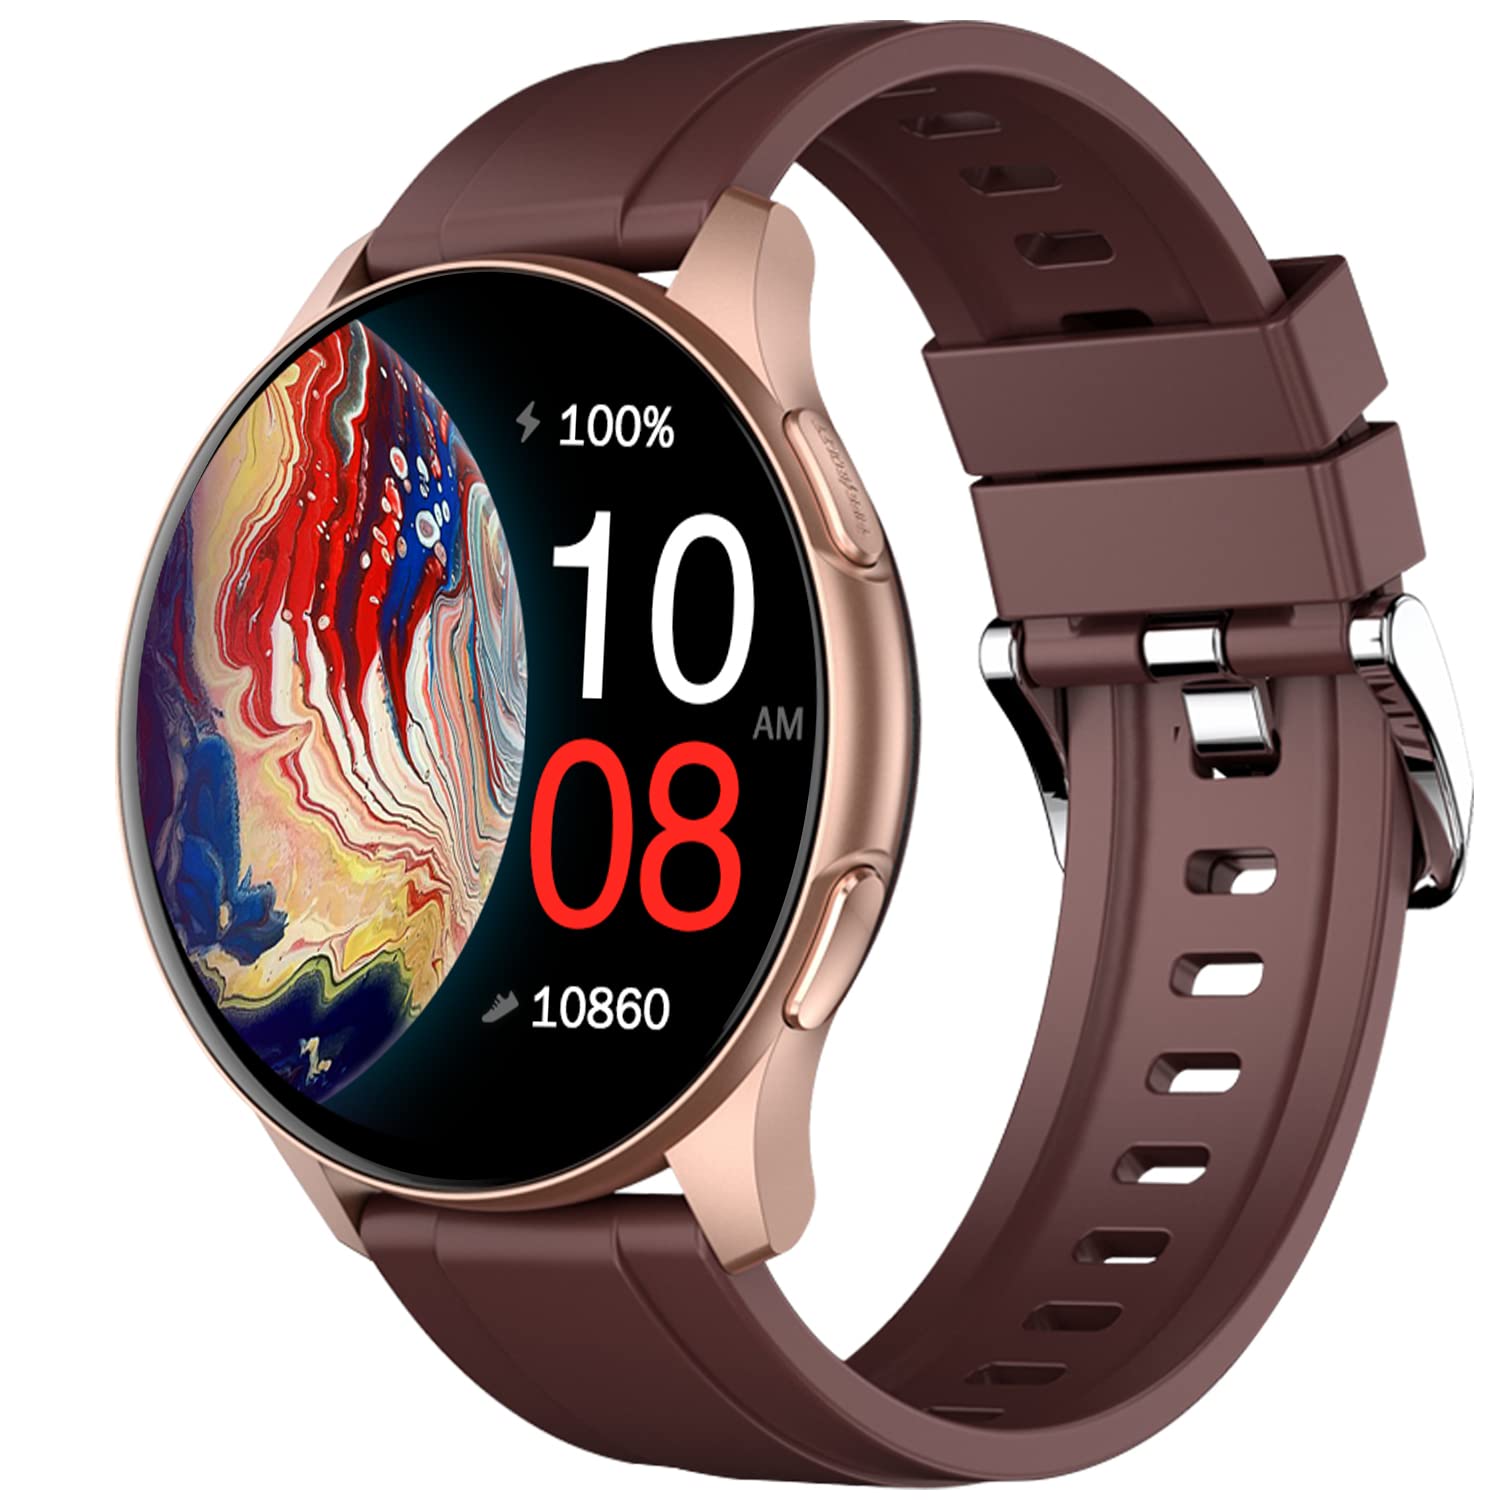 Fire-Boltt Invincible 1.39 inches AMOLED 454×454 Bluetooth Calling Smartwatch Always ON, 100 Sports Modes, 100 Inbuilt Watch Faces & 8GB (Brown Silicone), Large